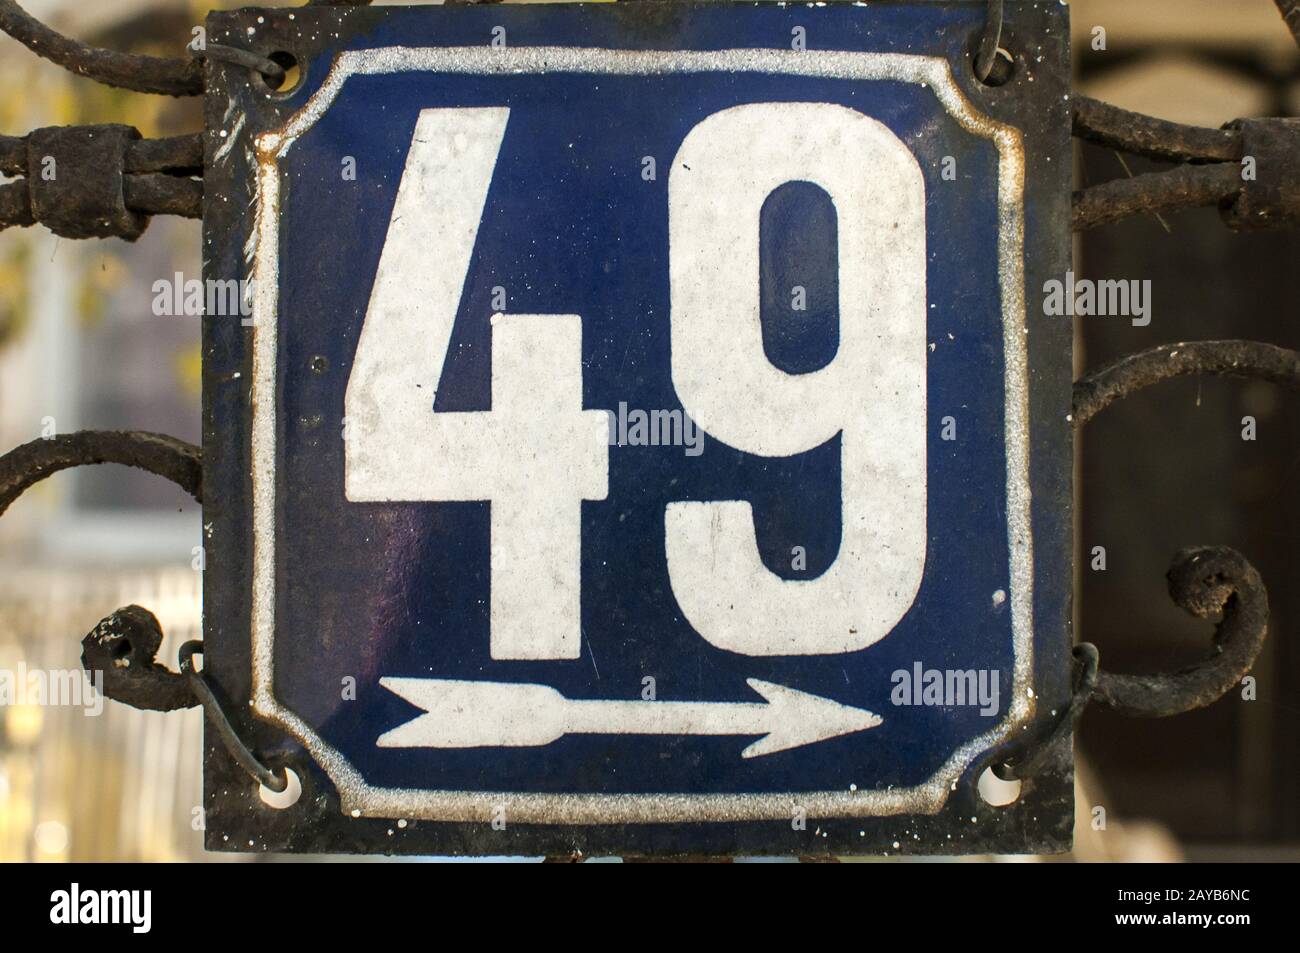 Weathered grunge square metal enameled plate of number of street address with number 49 closeup Stock Photo